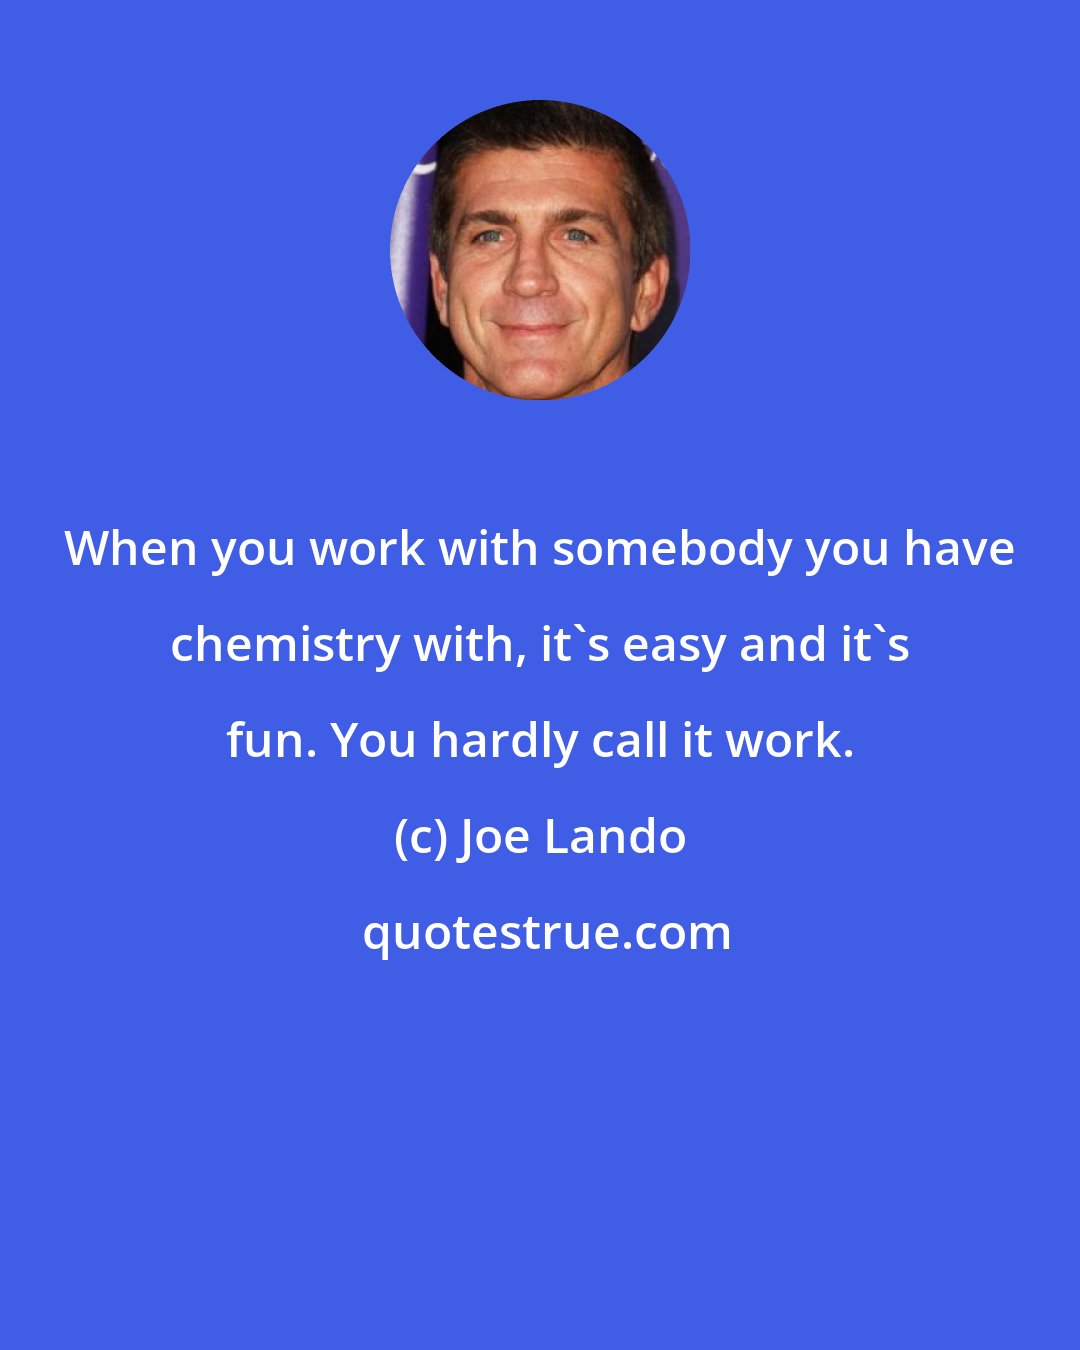 Joe Lando: When you work with somebody you have chemistry with, it's easy and it's fun. You hardly call it work.